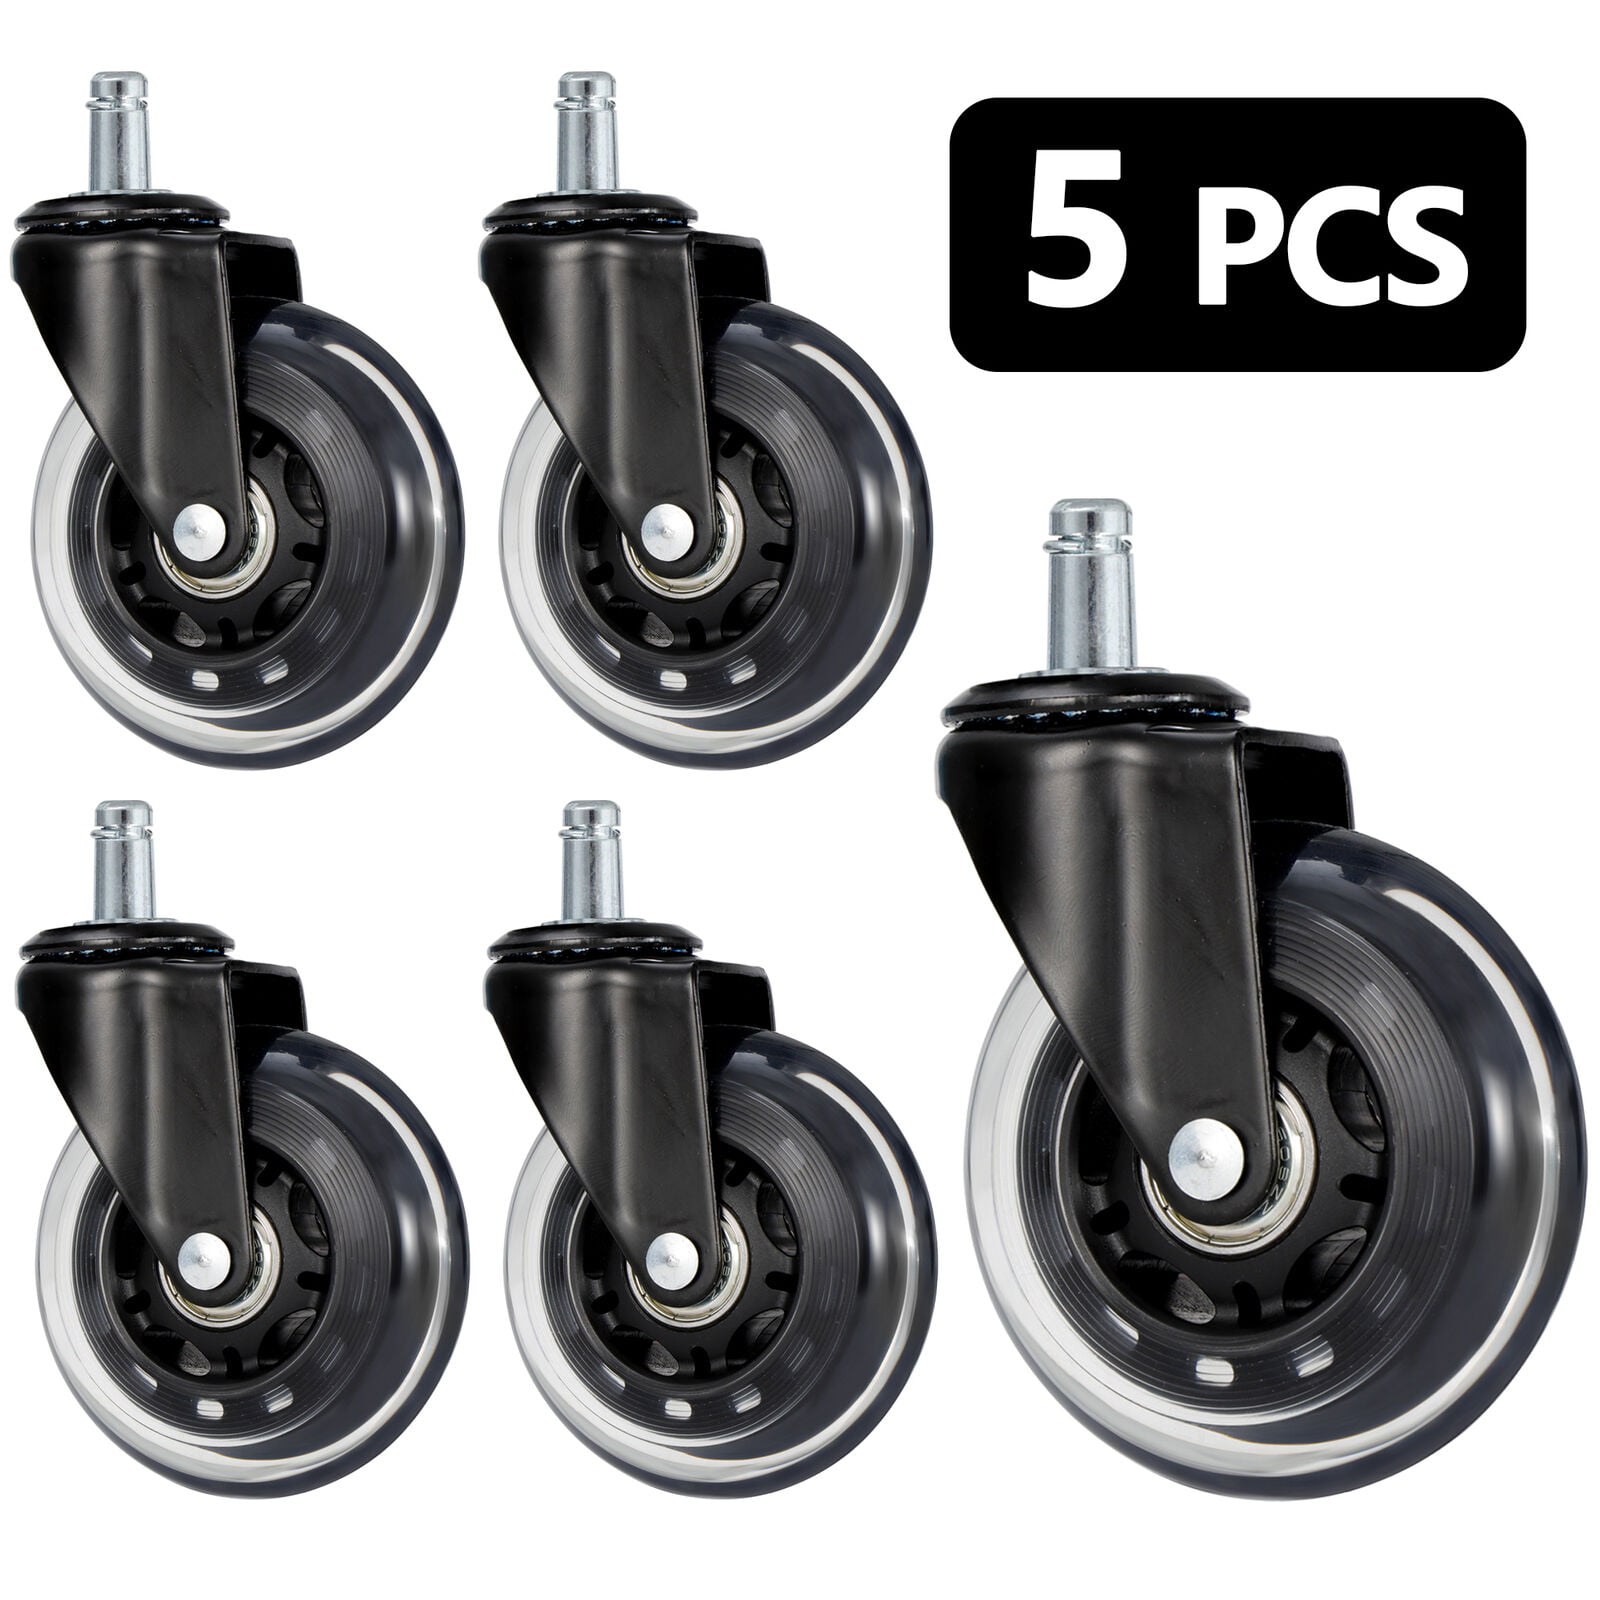 Swivel Casters Wheels 360° Rotate Castors For office chairs shopping carts sofa 